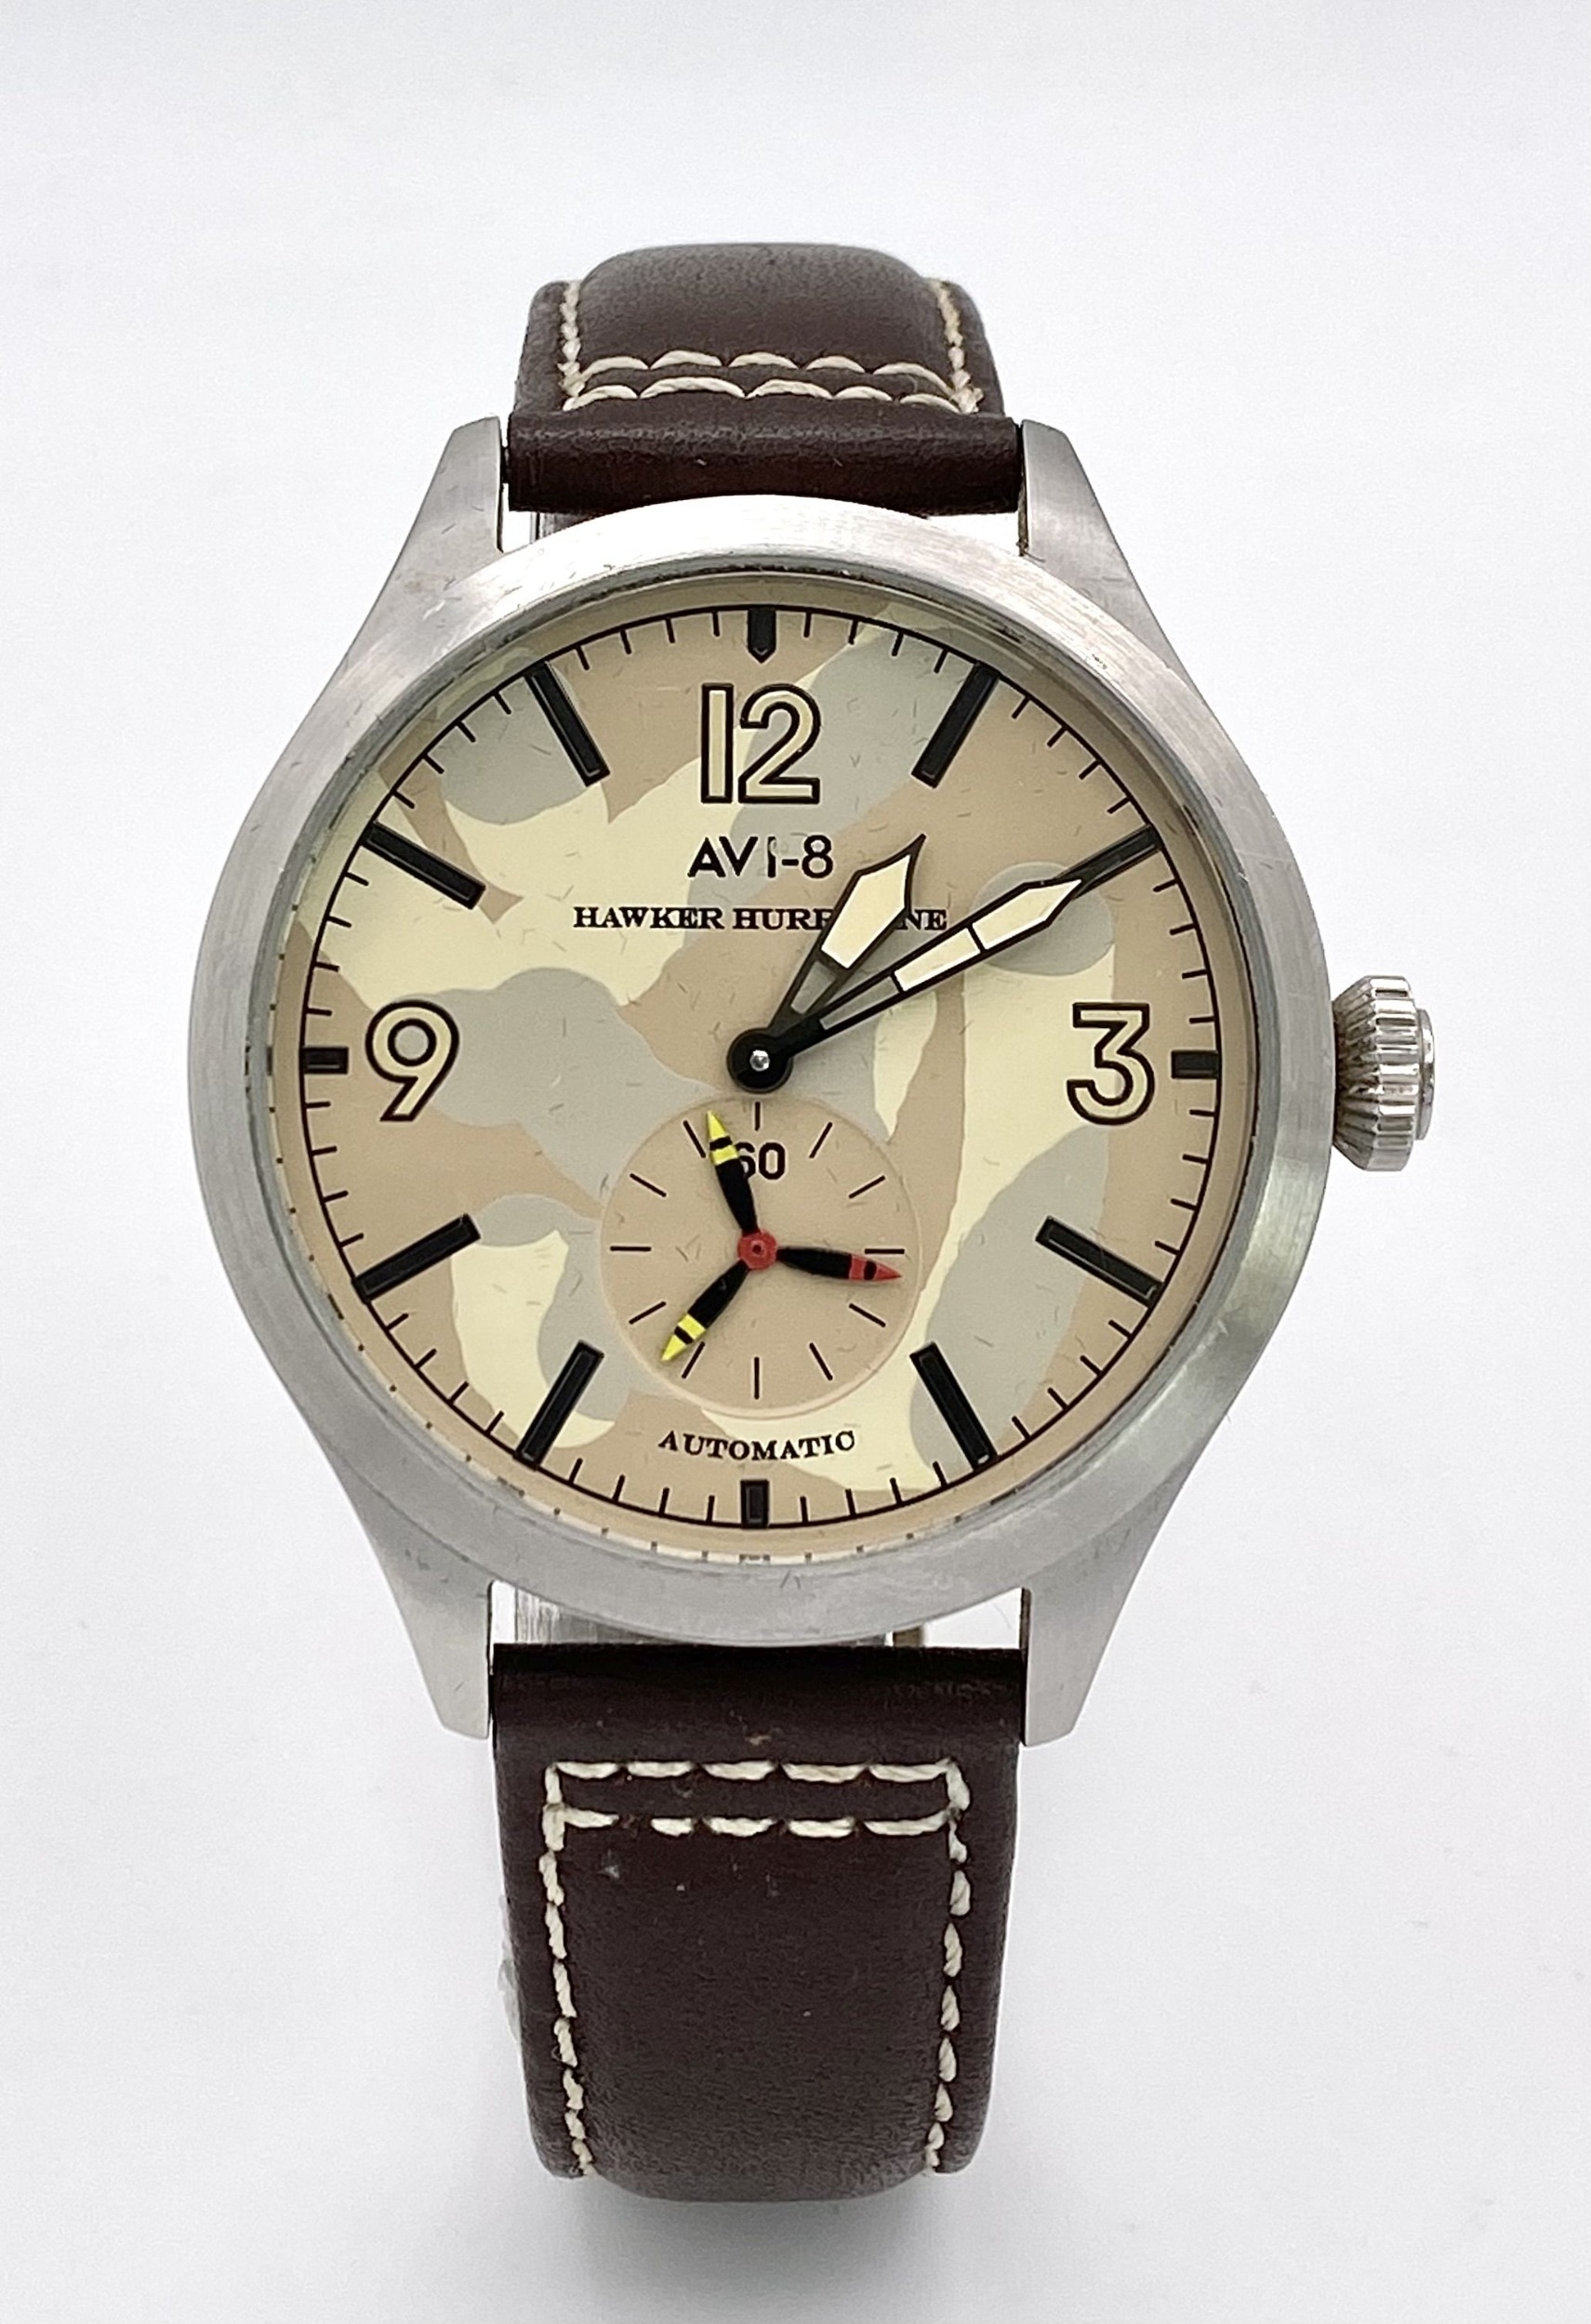 A Men’s ‘Hawker Hurricane’ Automatic Pilots Watch by AVI8. 47mm Including Crown. Full Working Order. - Image 2 of 9